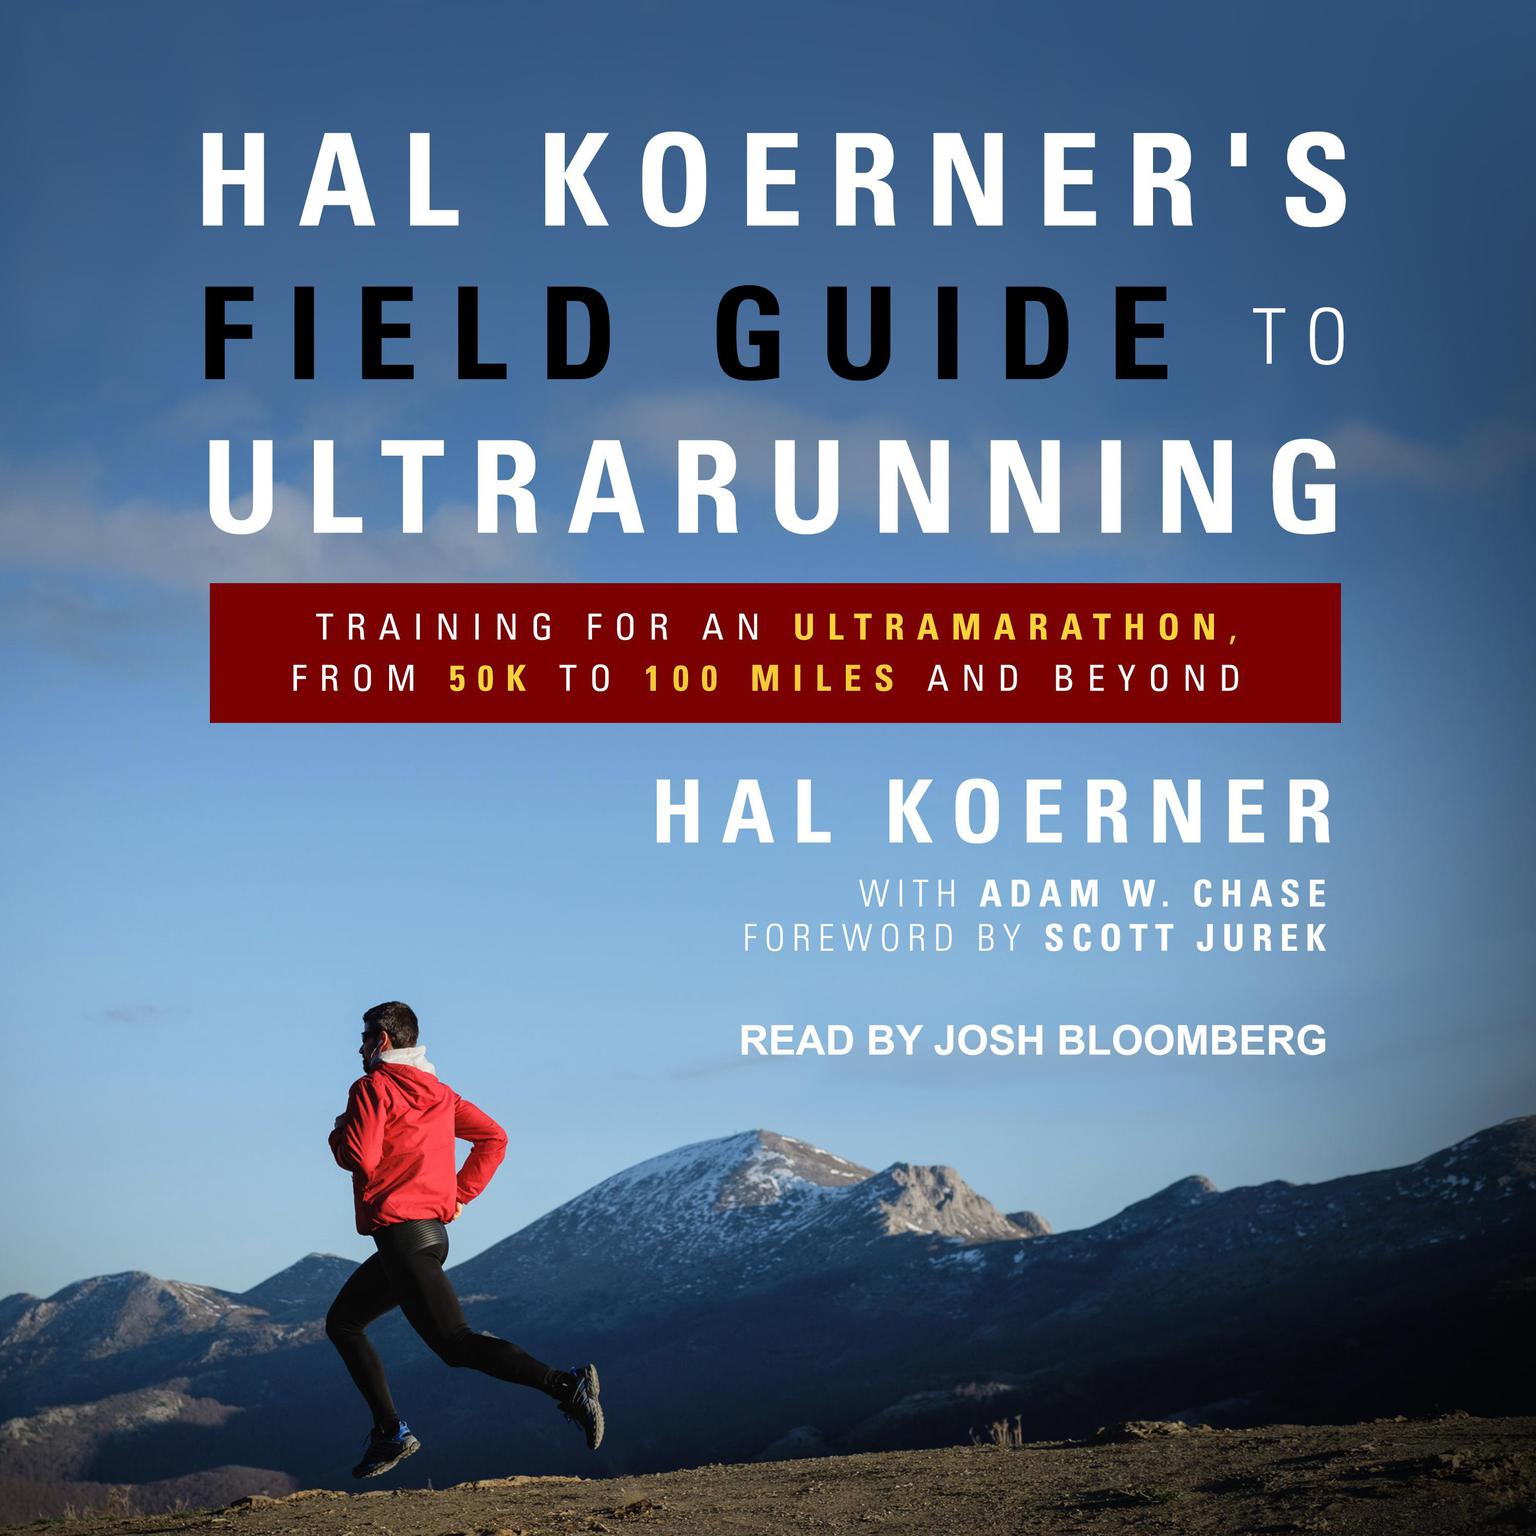 Hal Koerners Field Guide to Ultrarunning: Training for an Ultramarathon, from 50K to 100 Miles and Beyond Audiobook, by Hal Koerner